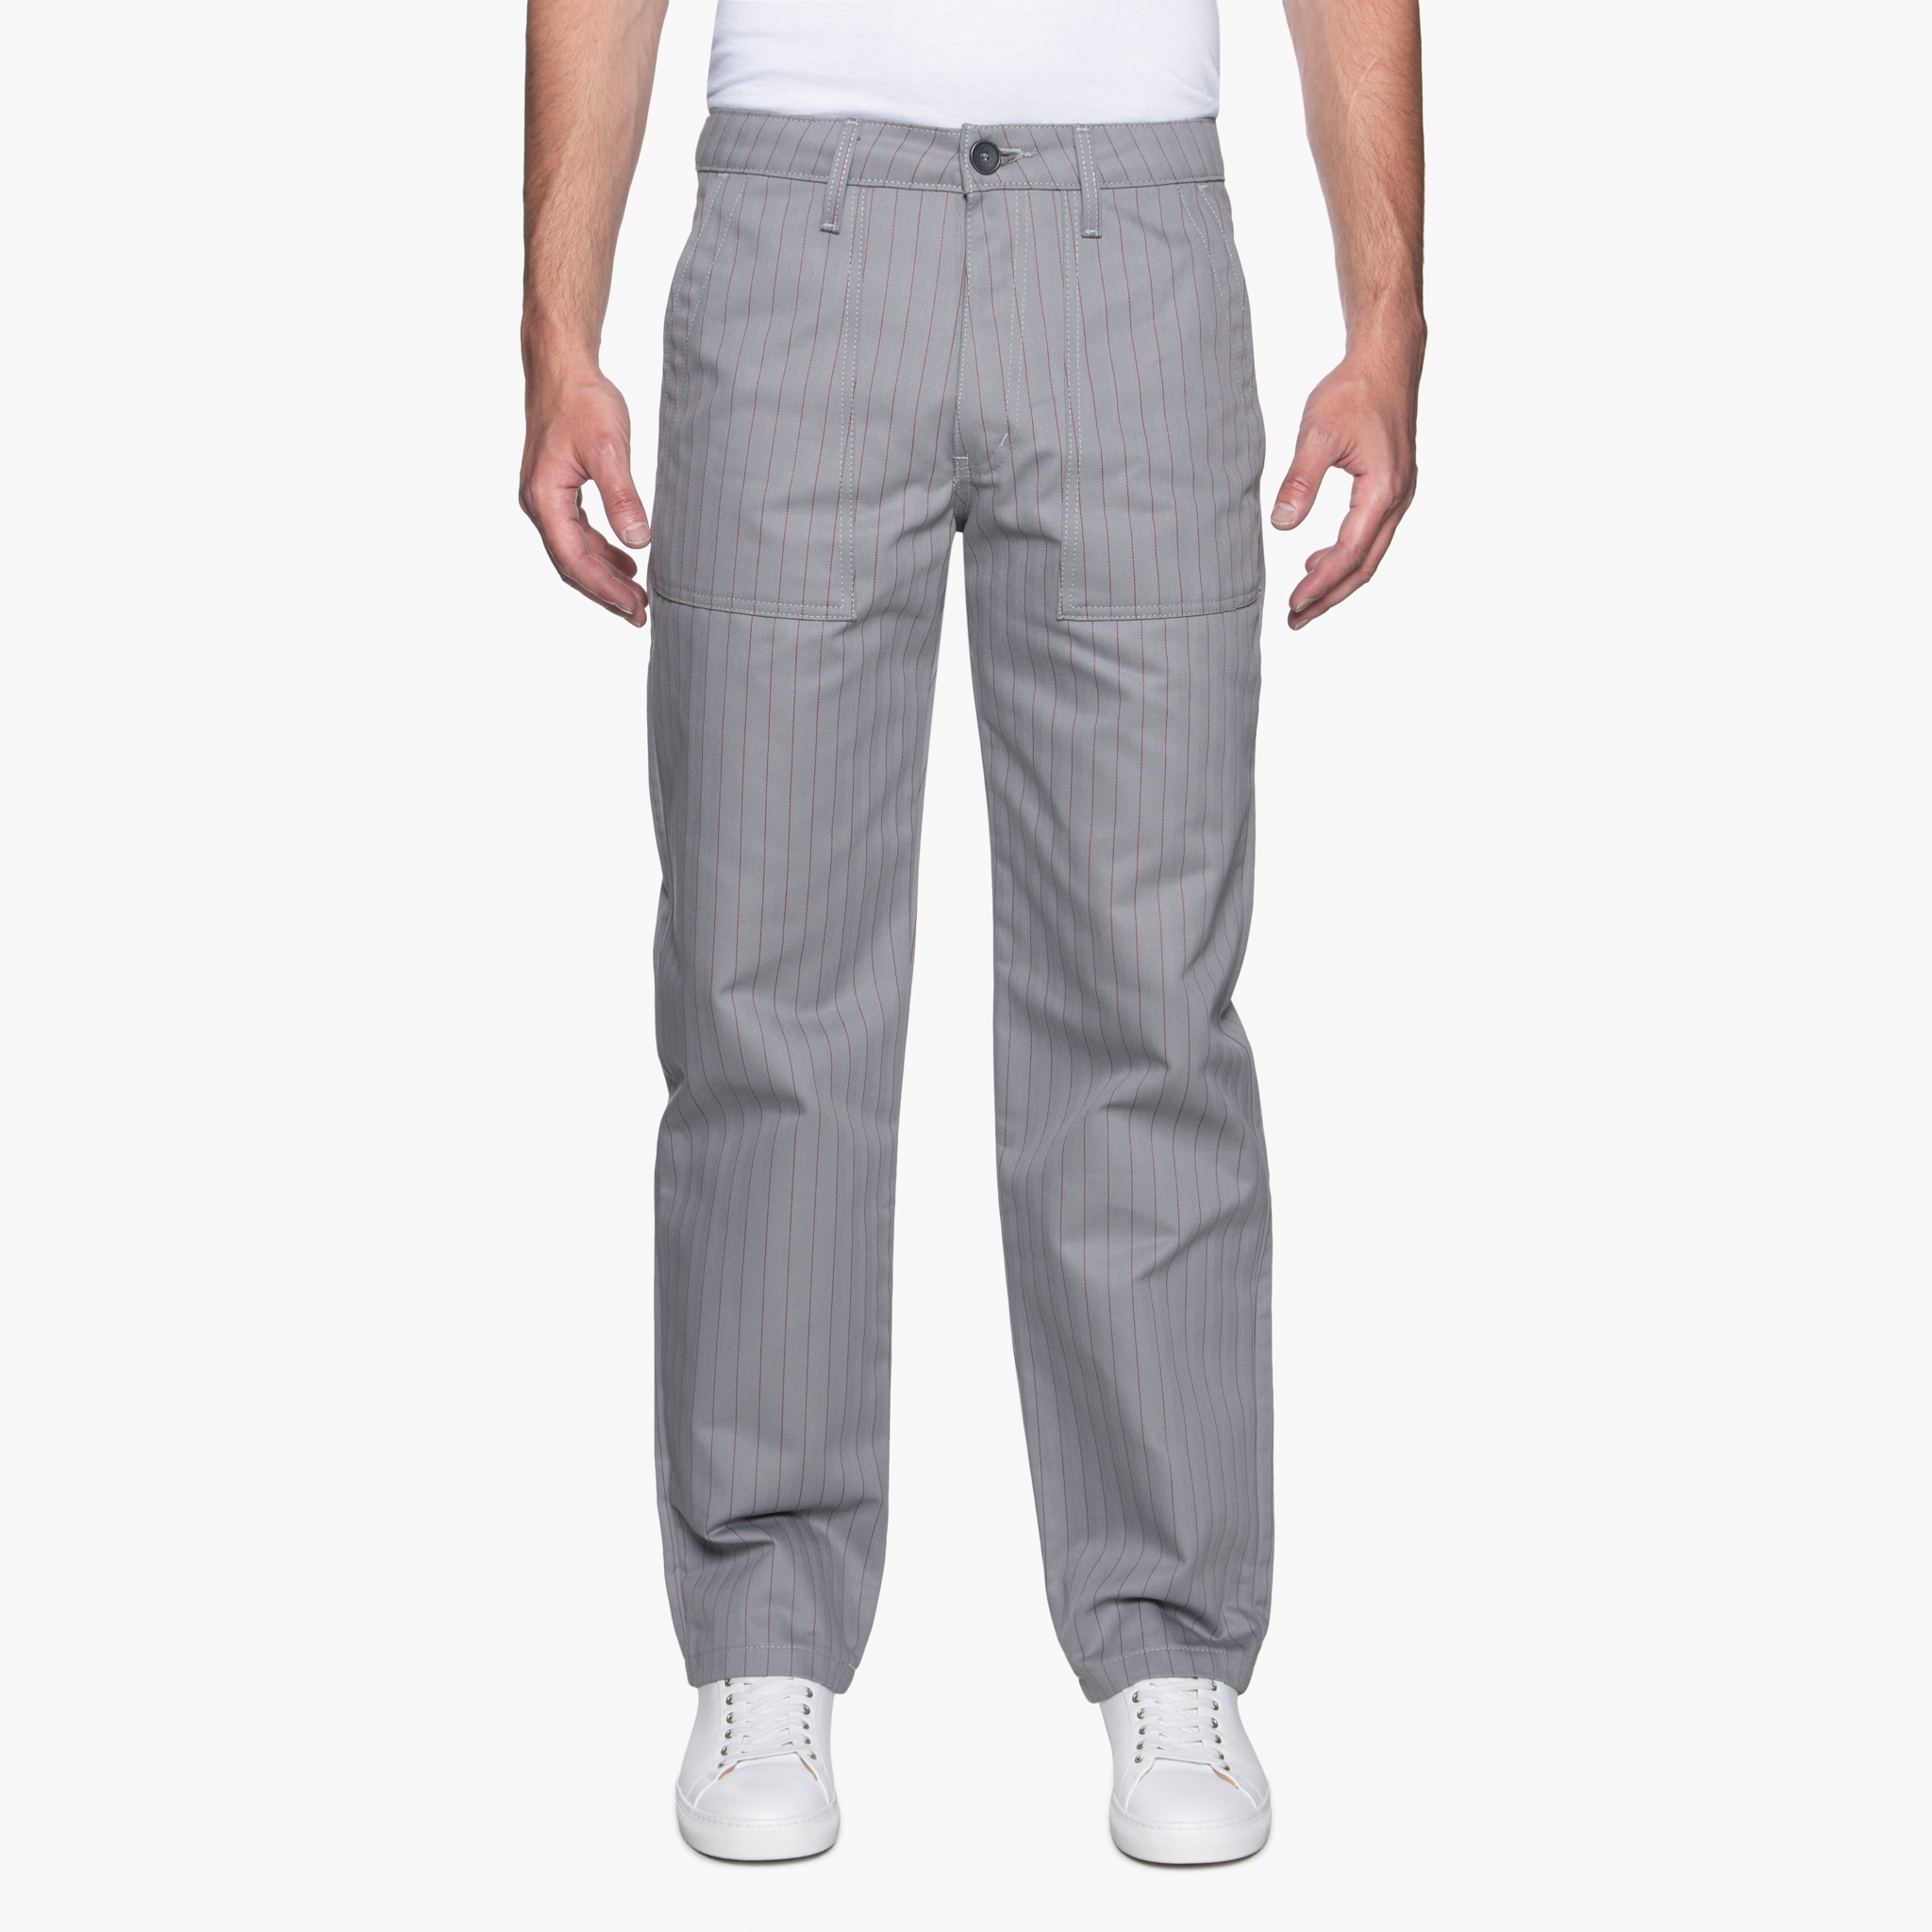  Work Pant - Repro Workwear Twill Grey - front 